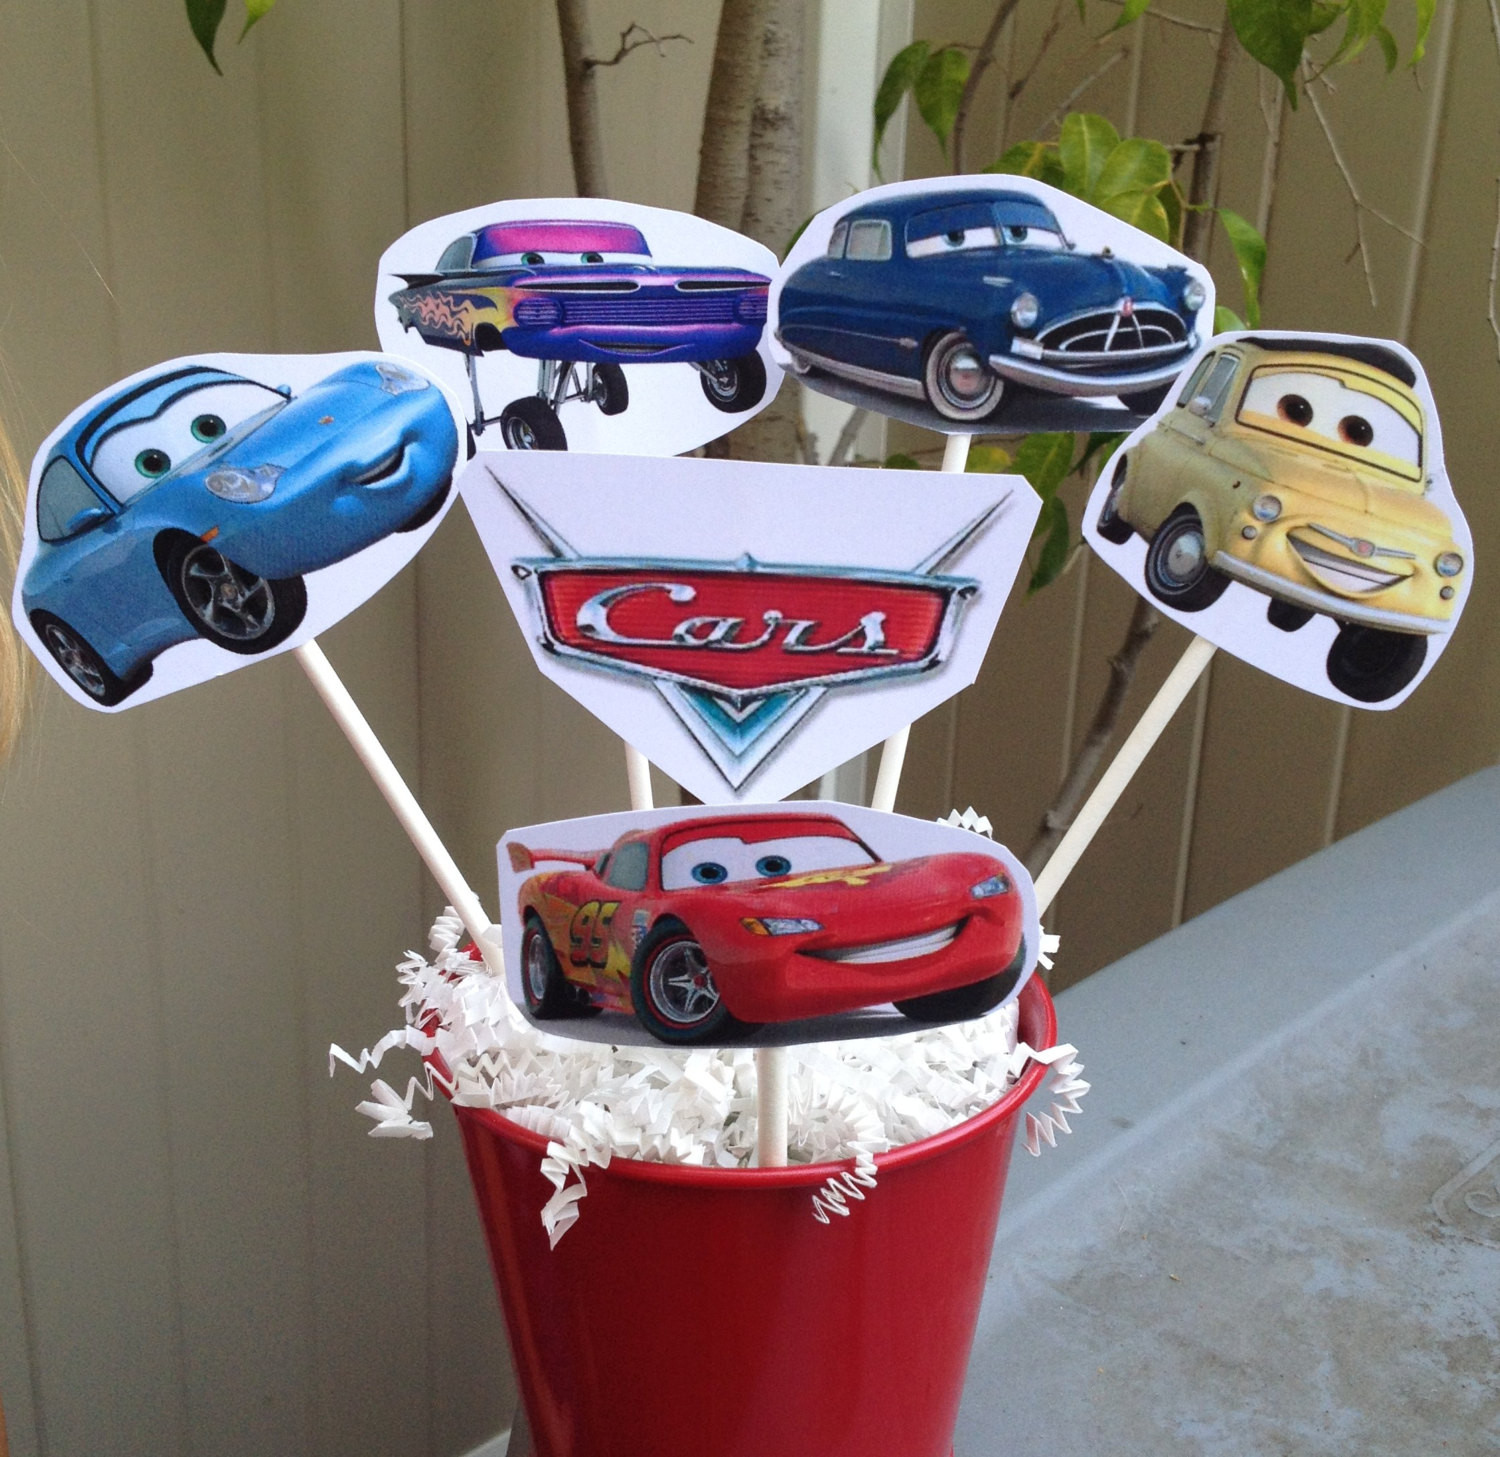 Cars Birthday Decor
 1 CARS Centerpiece Disney inspired CARS Party Decorations